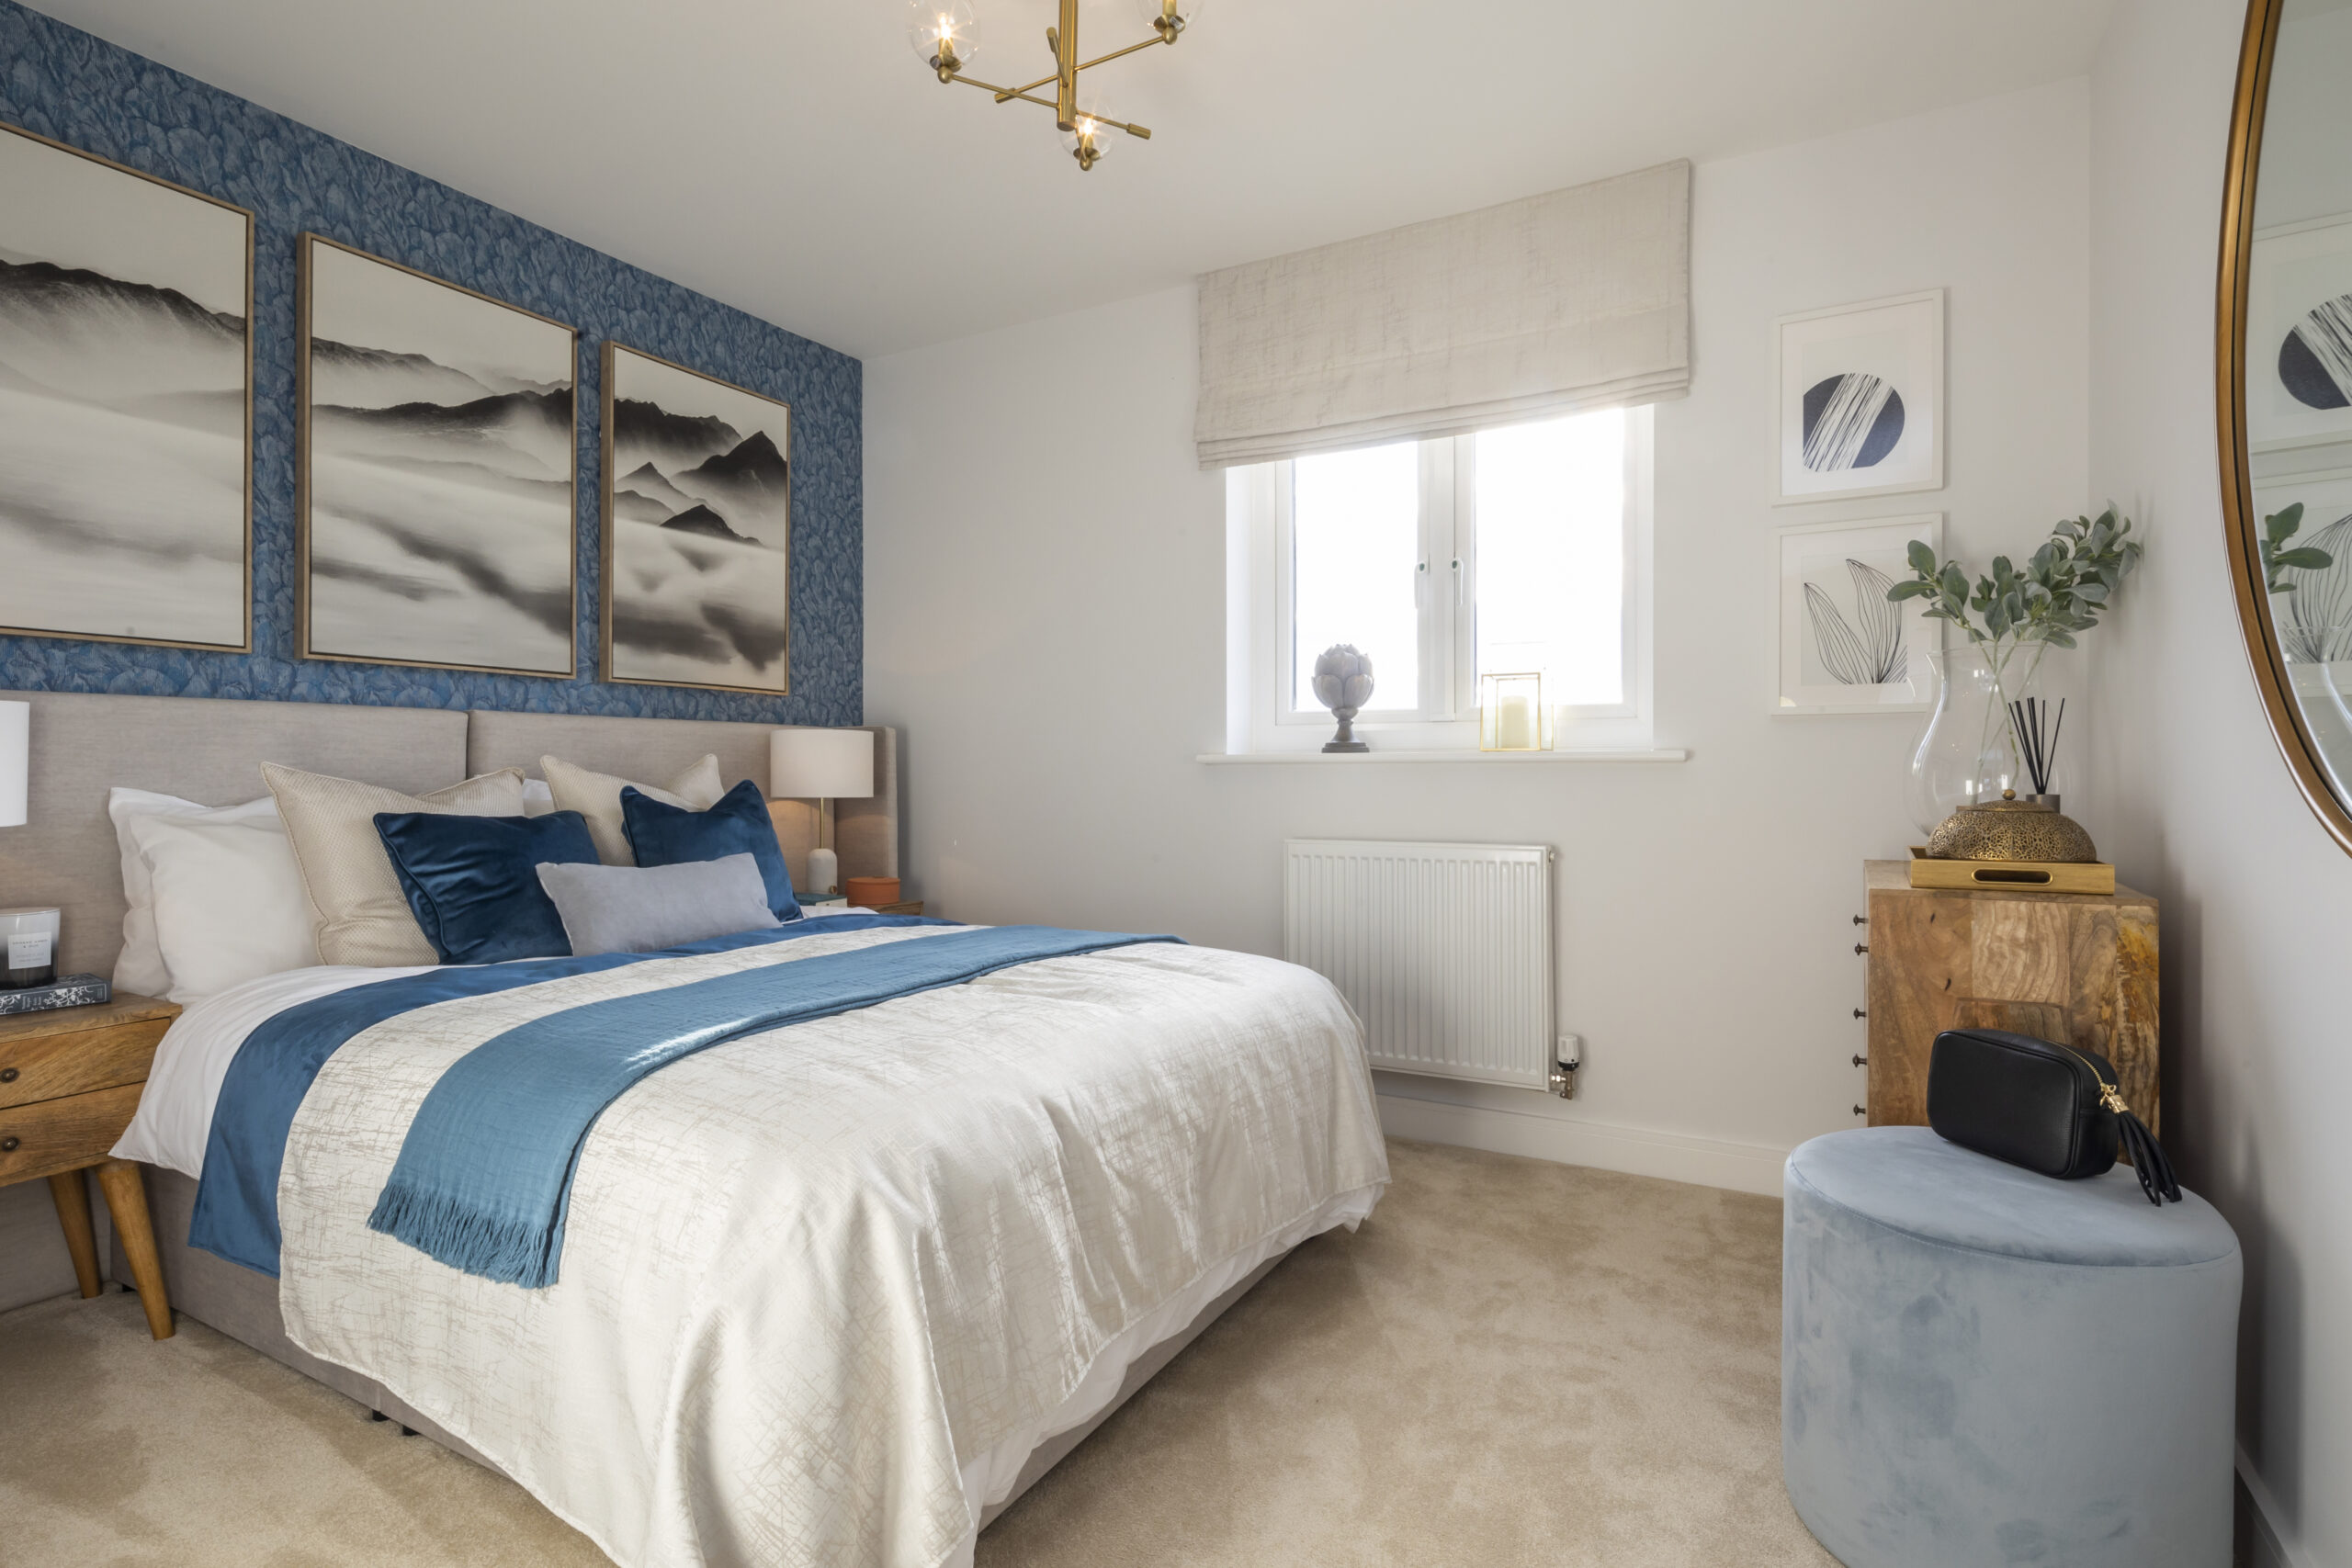 Internal image of a bedroom at the Beauchamp Park development by L&Q - available to purchase through Shared Ownership on Share to Buy!